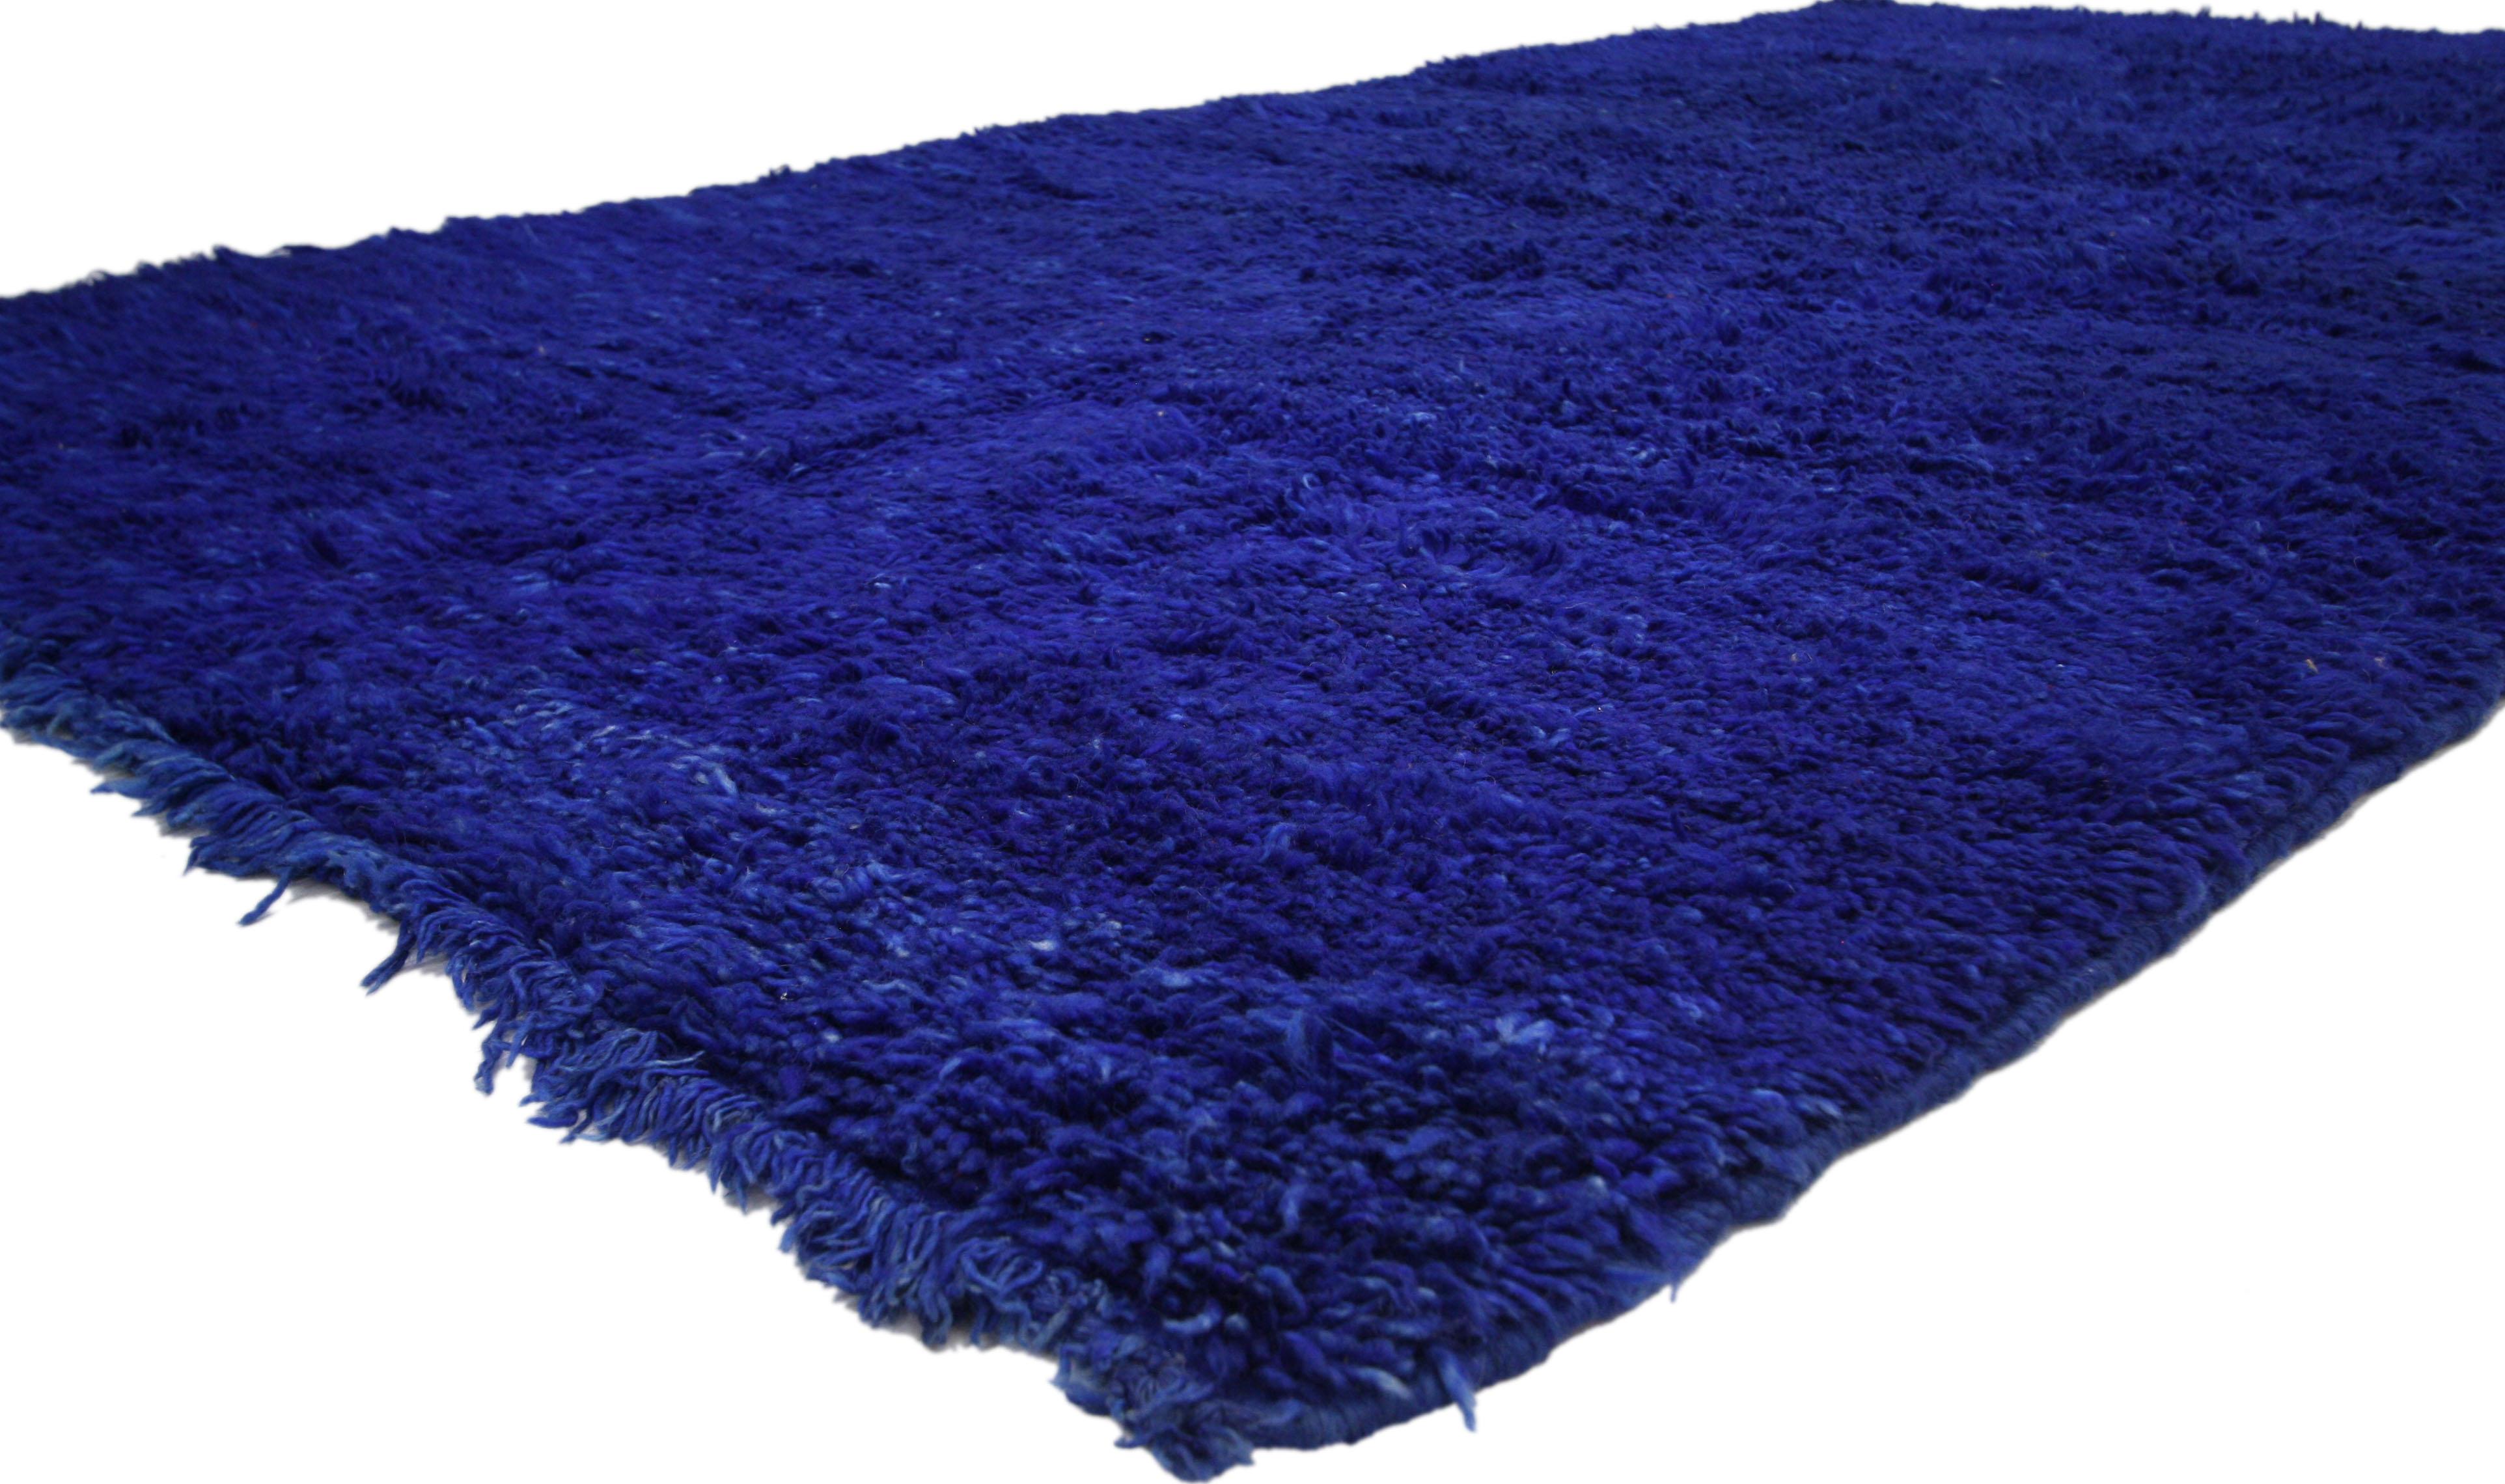 20654, Vintage Blue Indigo Beni M'Guild Moroccan Rug, Berber Blue Moroccan Rug. Featuring rich waves of abrash, luxury underfoot and a pop of color, this hand-knotted wool vintage Moroccan indigo Beni Mguild rug represents modern style while staying